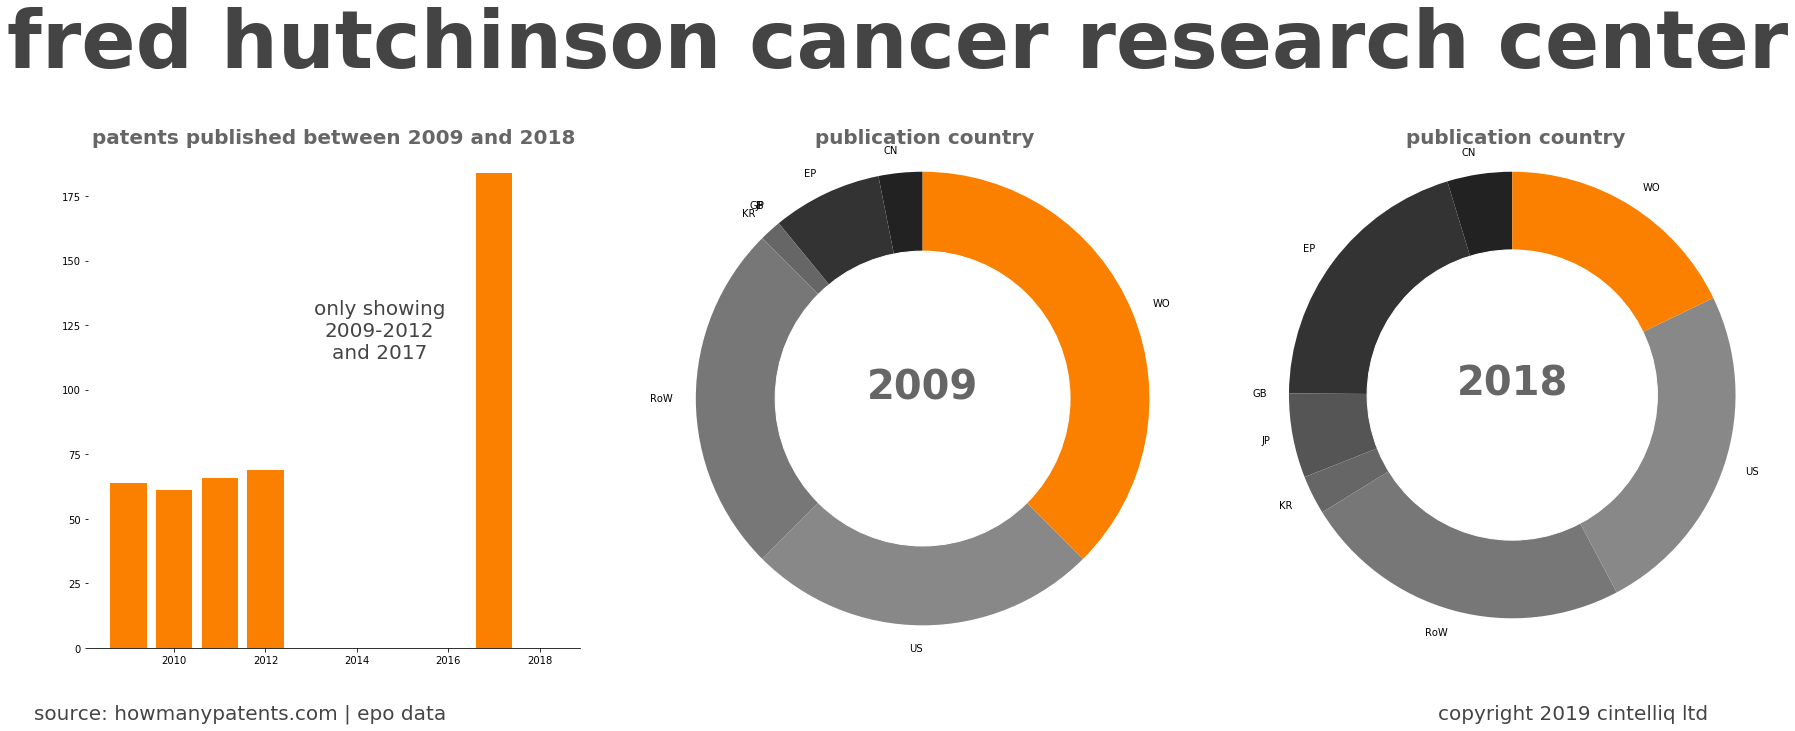 summary of patents for Fred Hutchinson Cancer Research Center